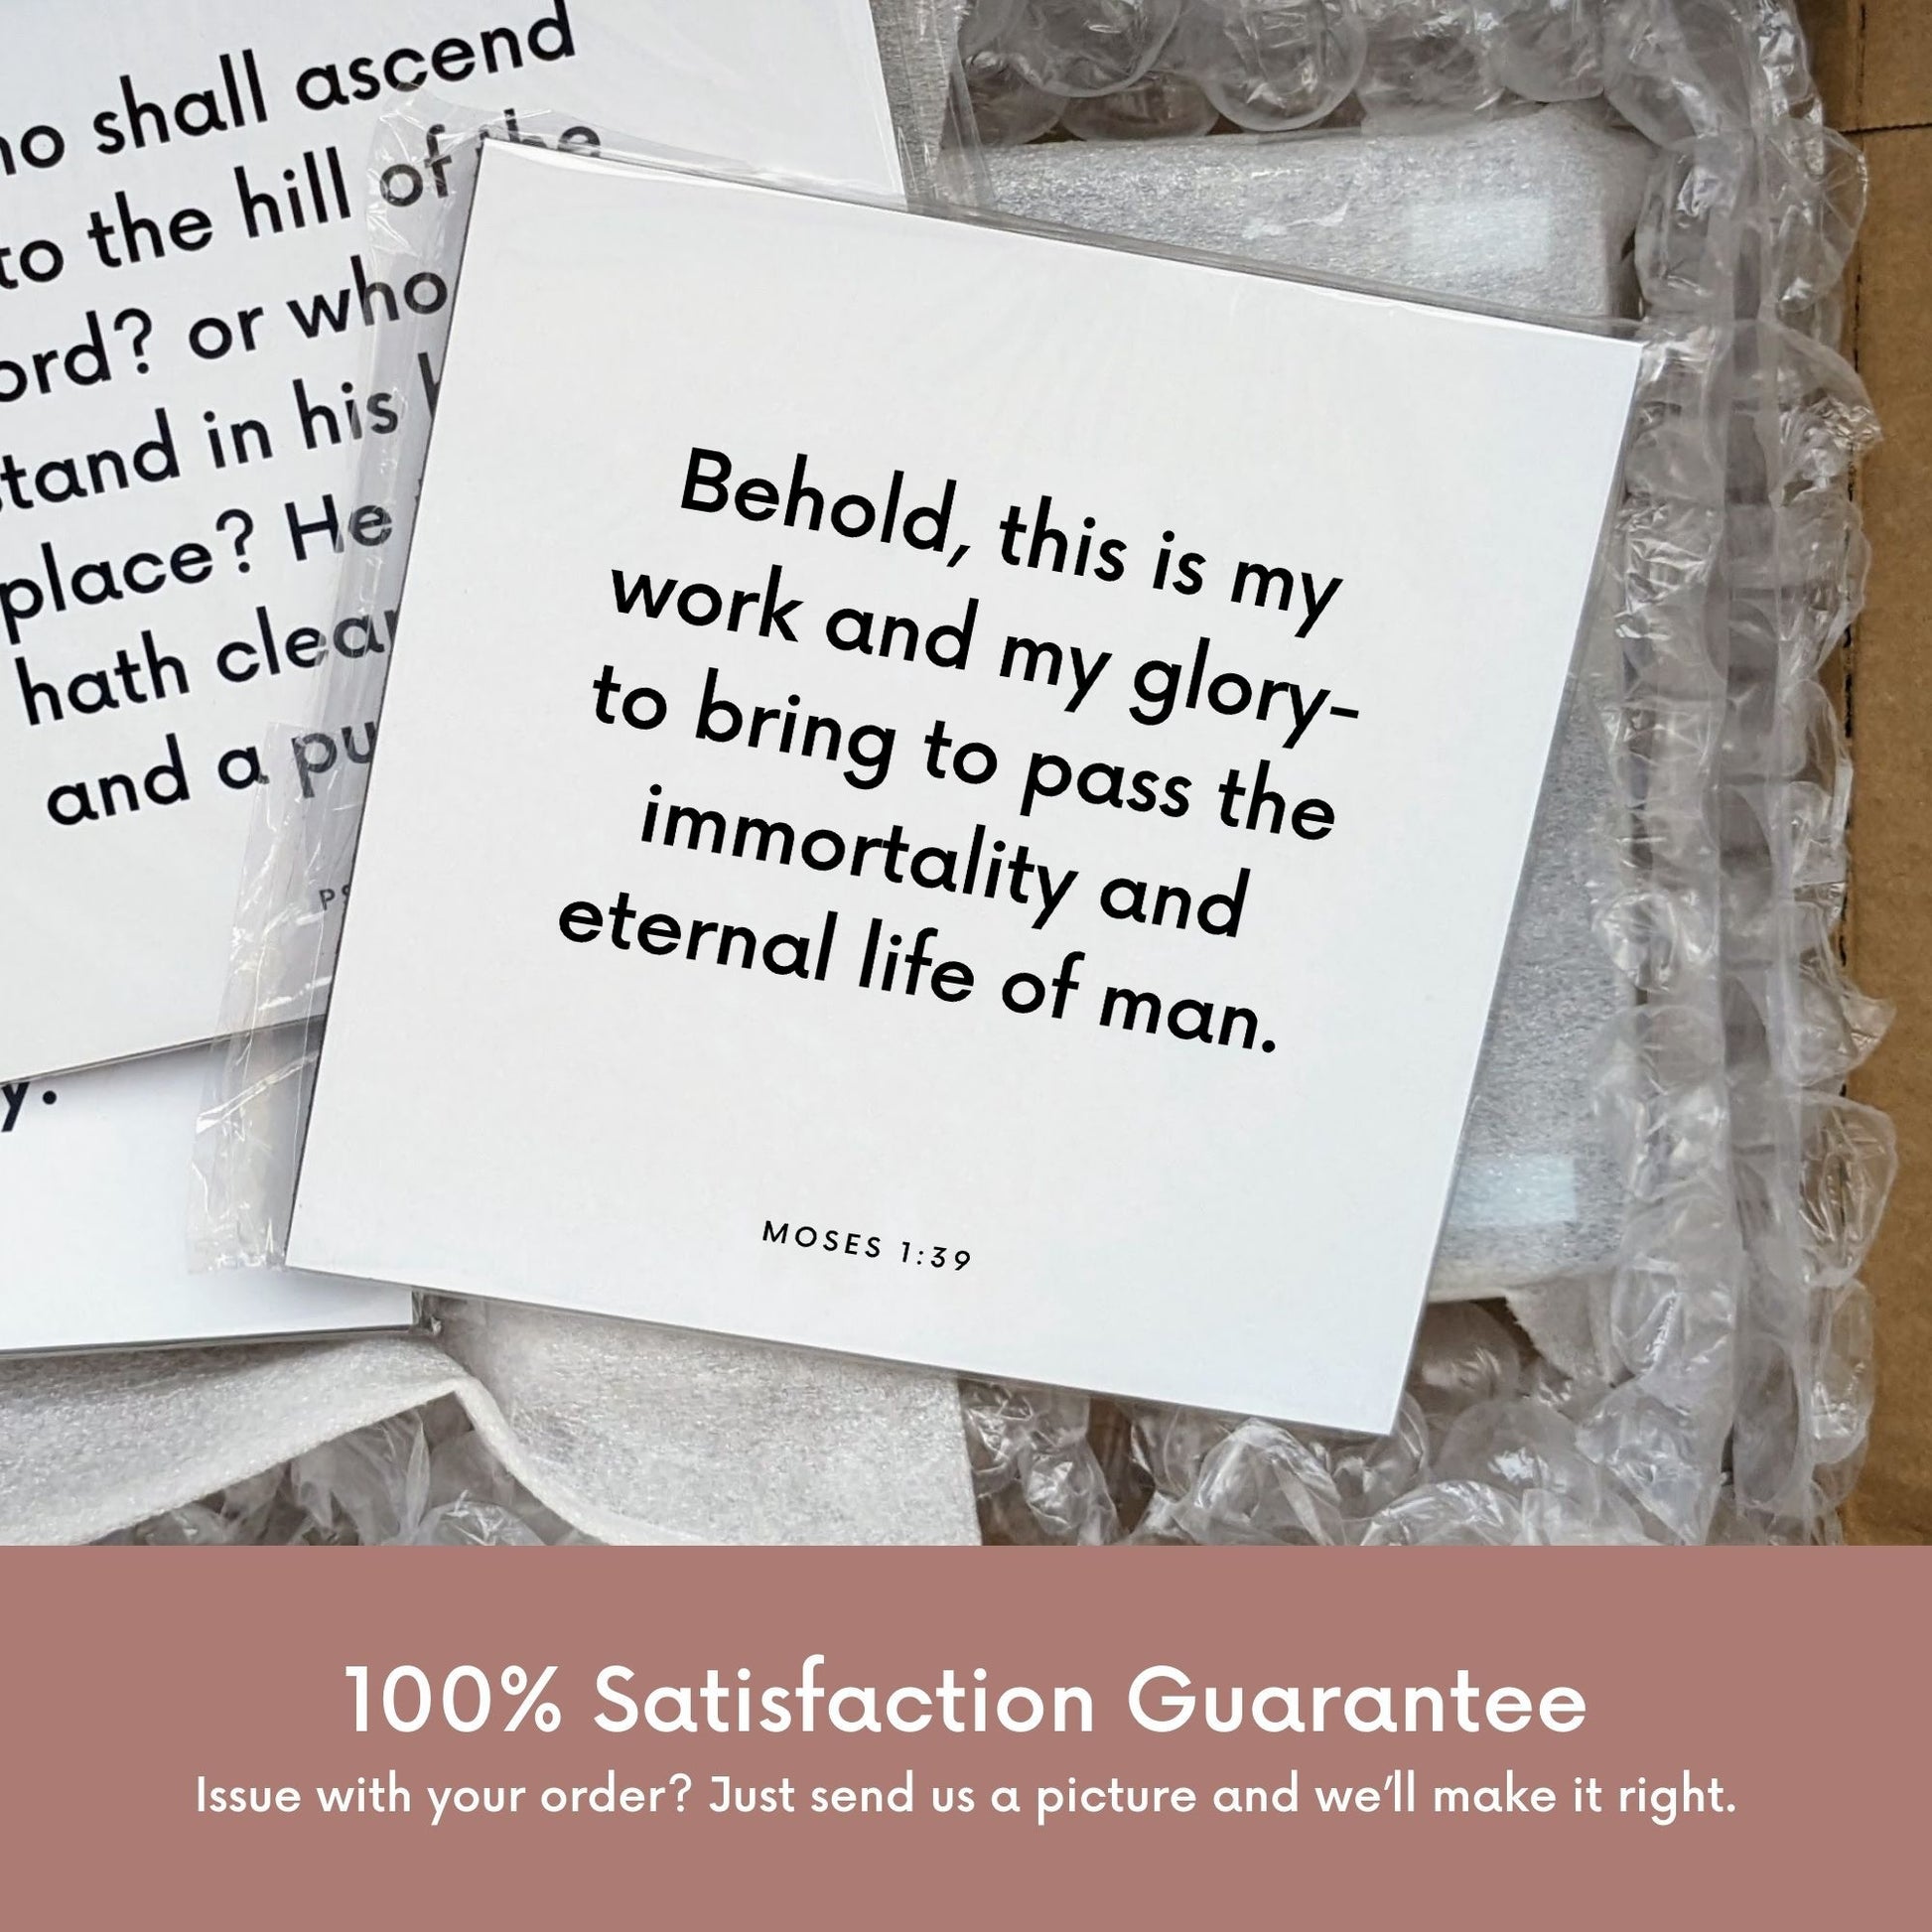 Shipping materials for scripture tile of Moses 1:39 - "Behold, this is my work and my glory"